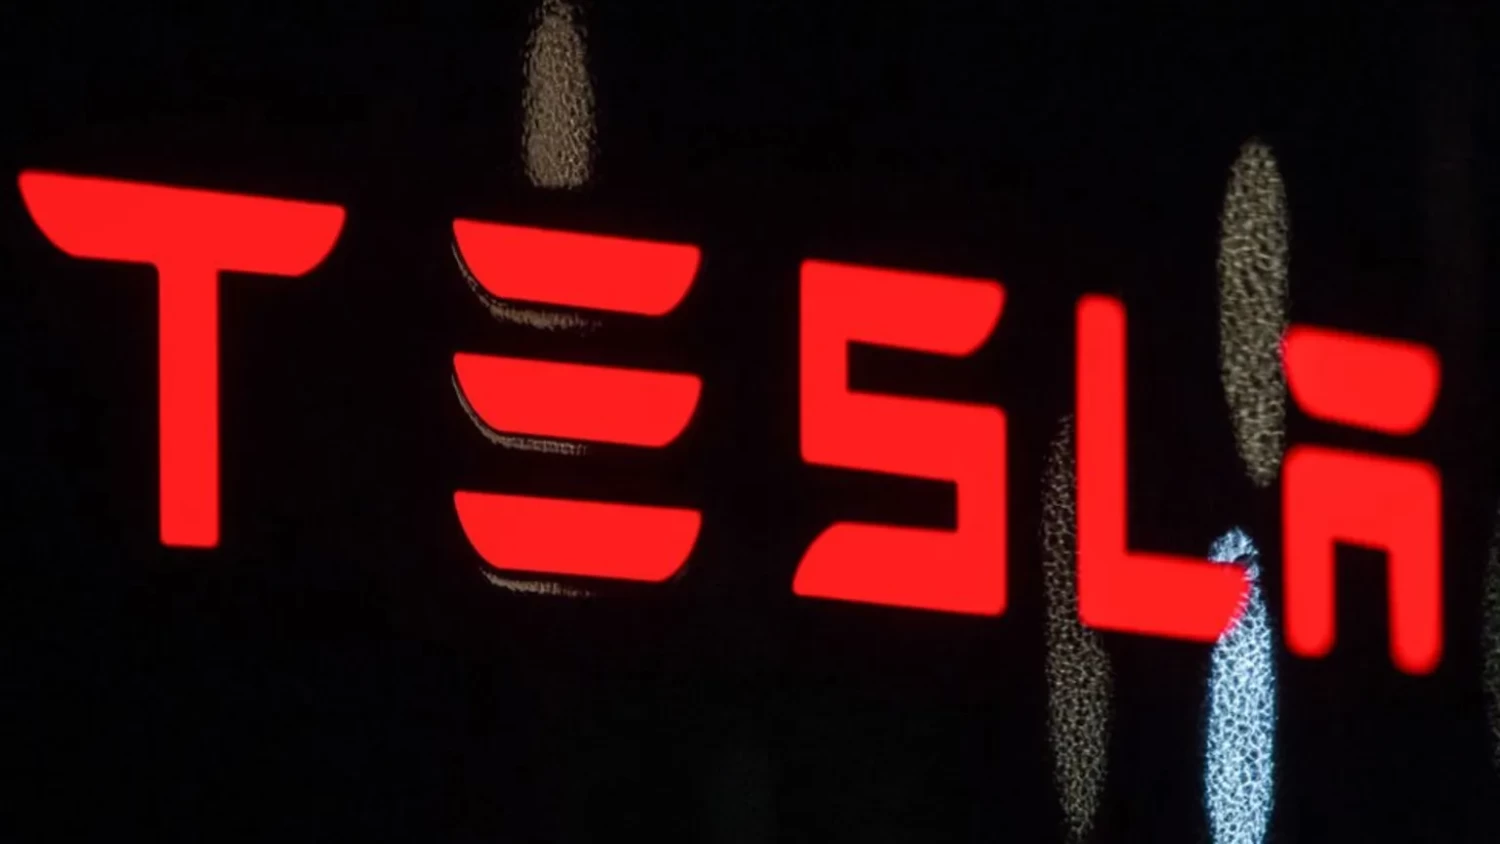 Tesla lays off more than 10% of its workforce